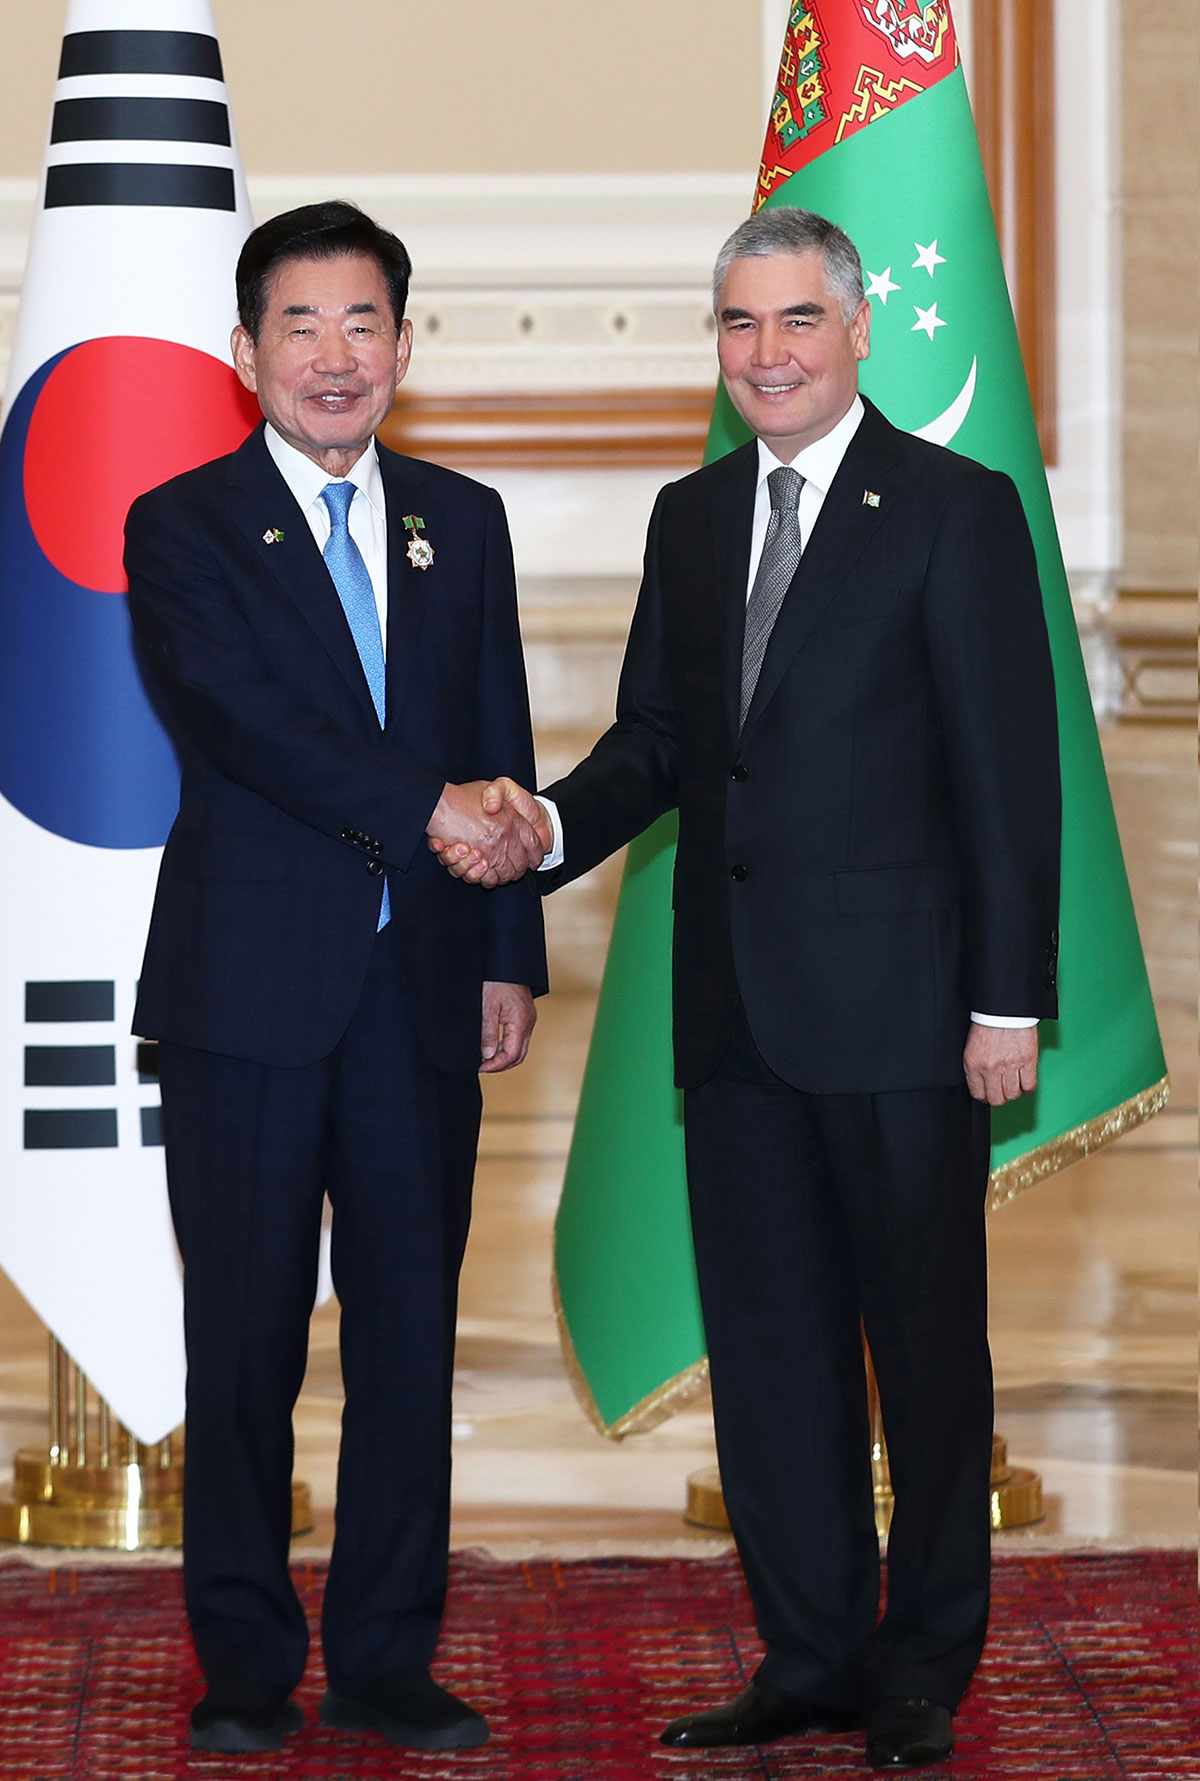 Chairman of Halk Maslakhaty of Turkmentistan Gurbanguly Berdimuhamedov is pictured shaking hands with the Speaker of the National Assembly of South Korea Kim Jin-pyo on July 20. (Turkmen embassy in Seoul)